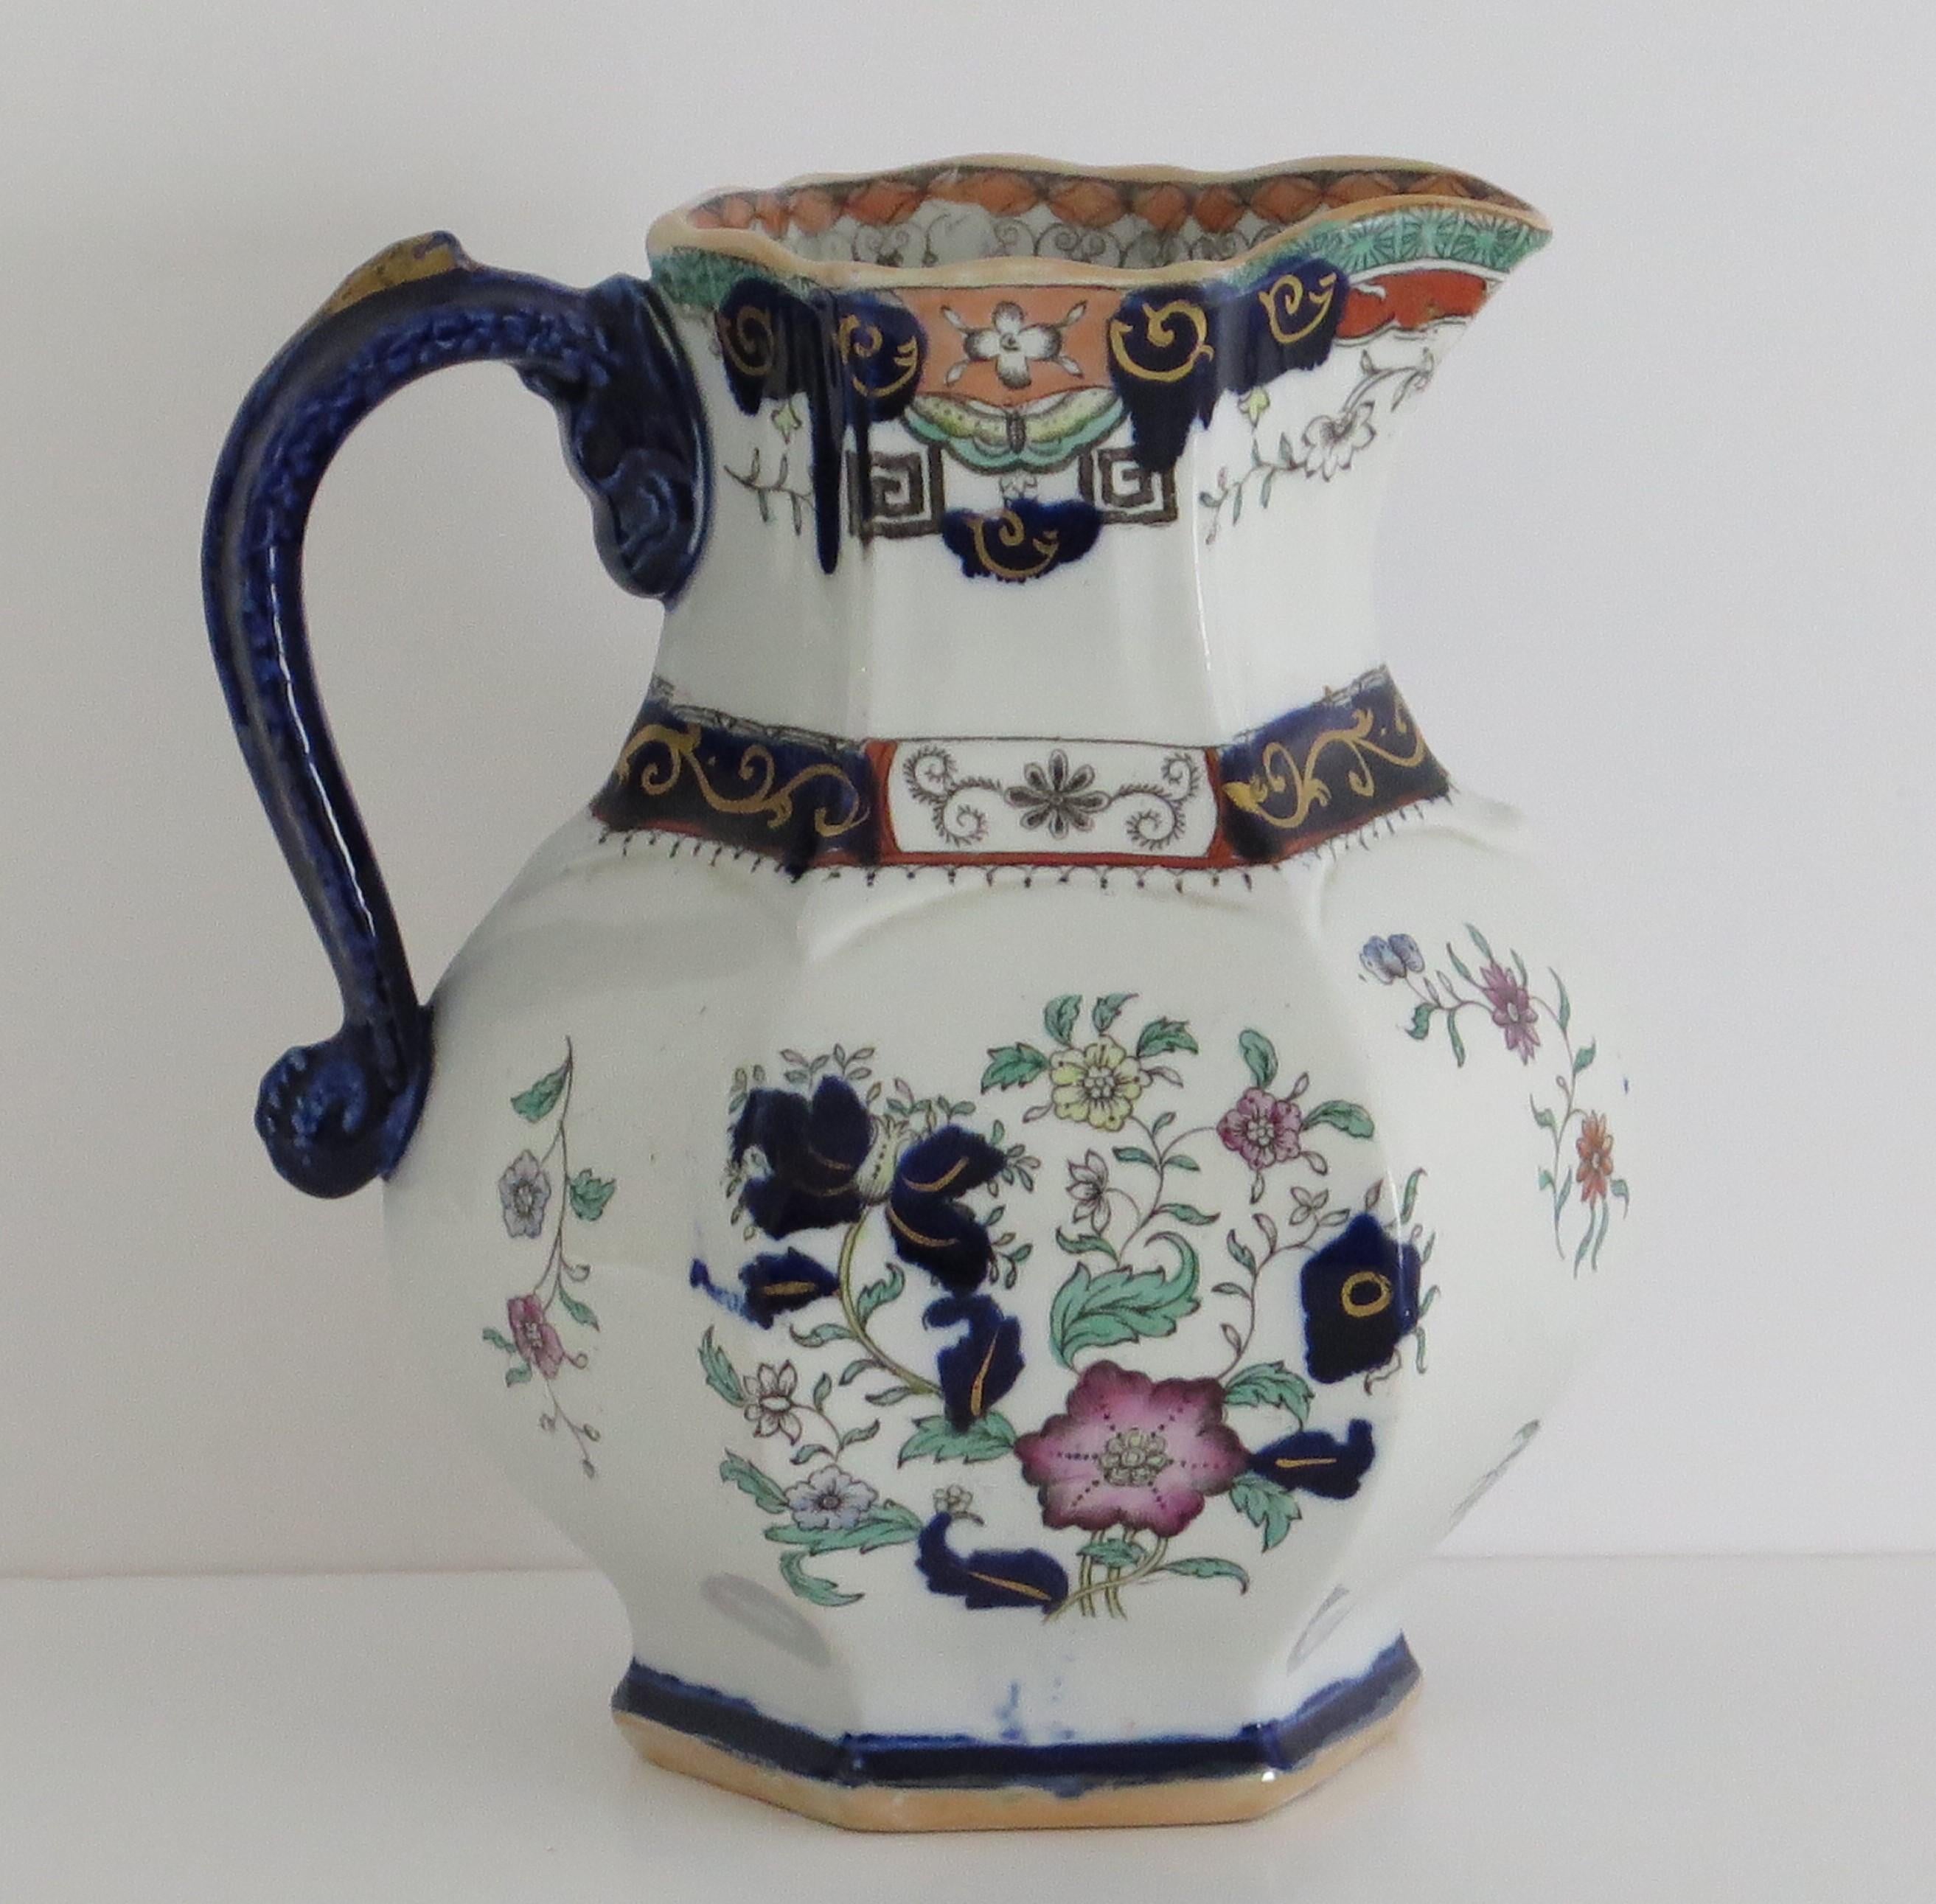 This is a very decorative fairly large & well hand painted, Jug or Pitcher made by Mason's Ironstone pottery, circa 1830.

It has a rare shape and pattern.

A jug of the same shape and pattern is illustrated on Page 192, Plate 245 of Godden's